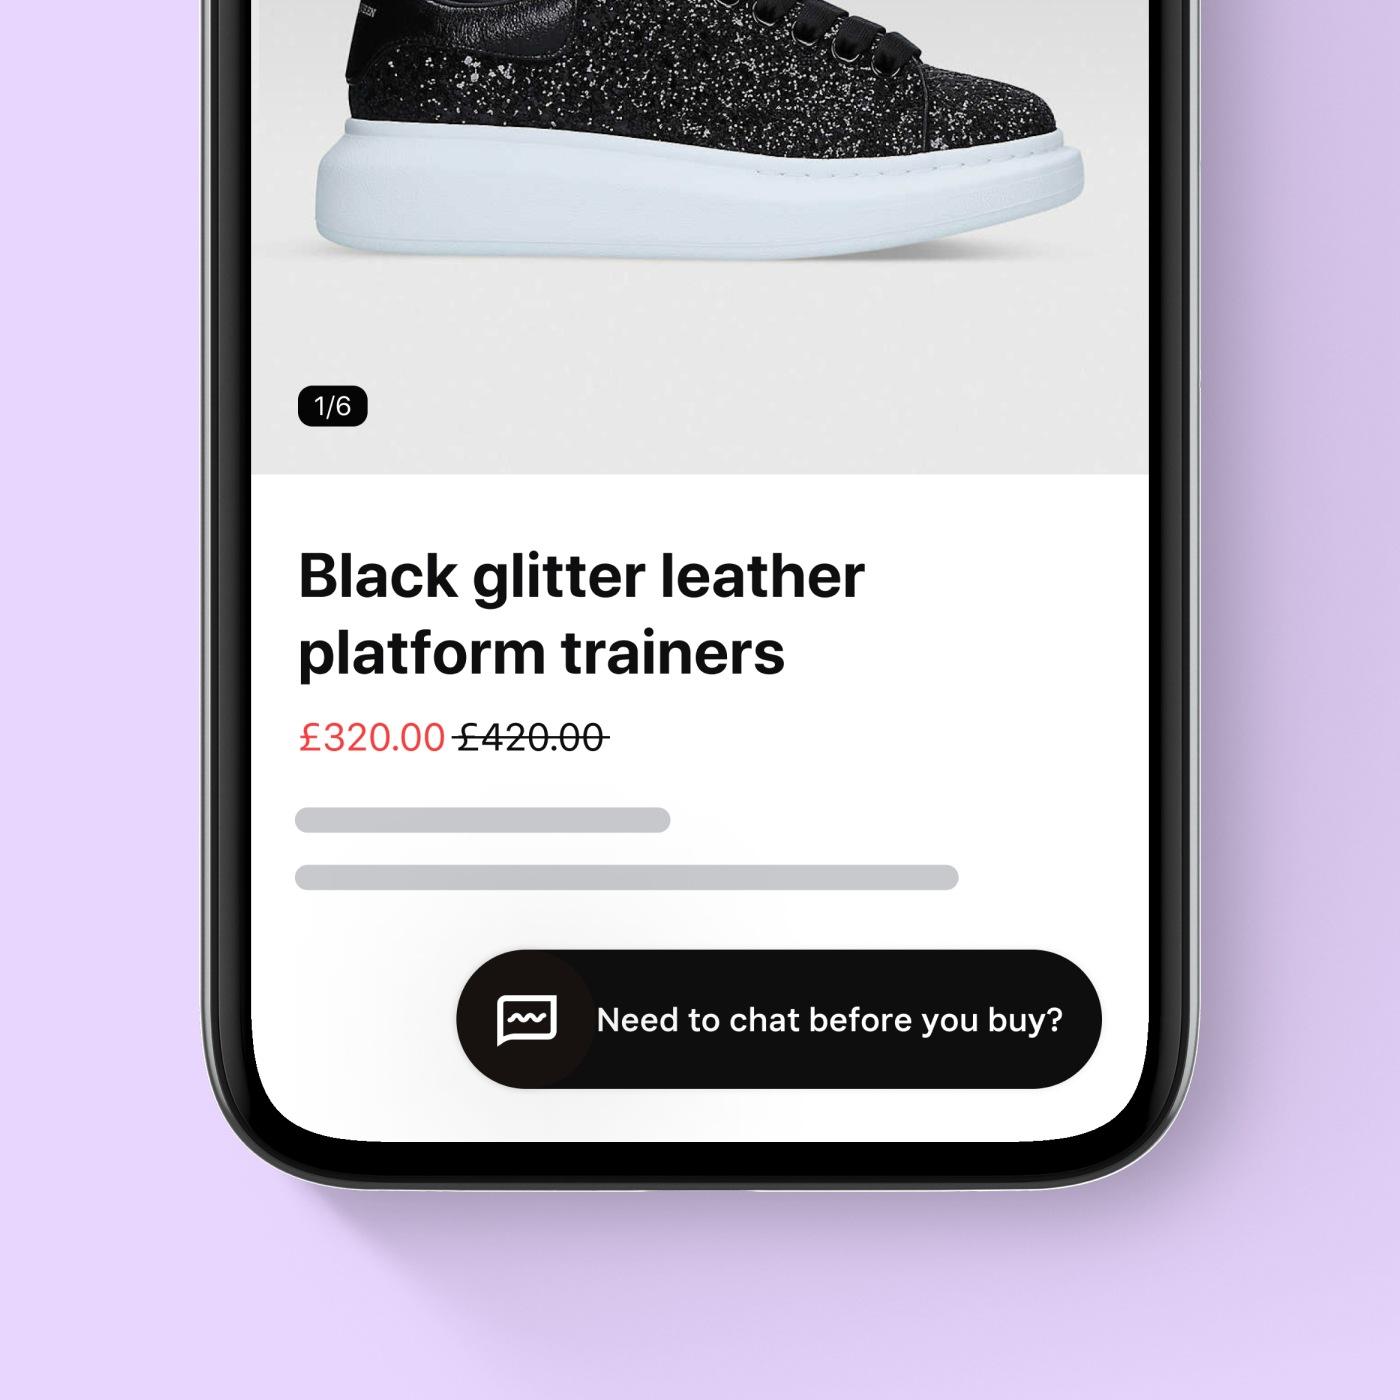 Define where across the shopper journey on your site Virtual Shopping is displayed. Shoppers interact with the prompt to connect directly with your product experts.